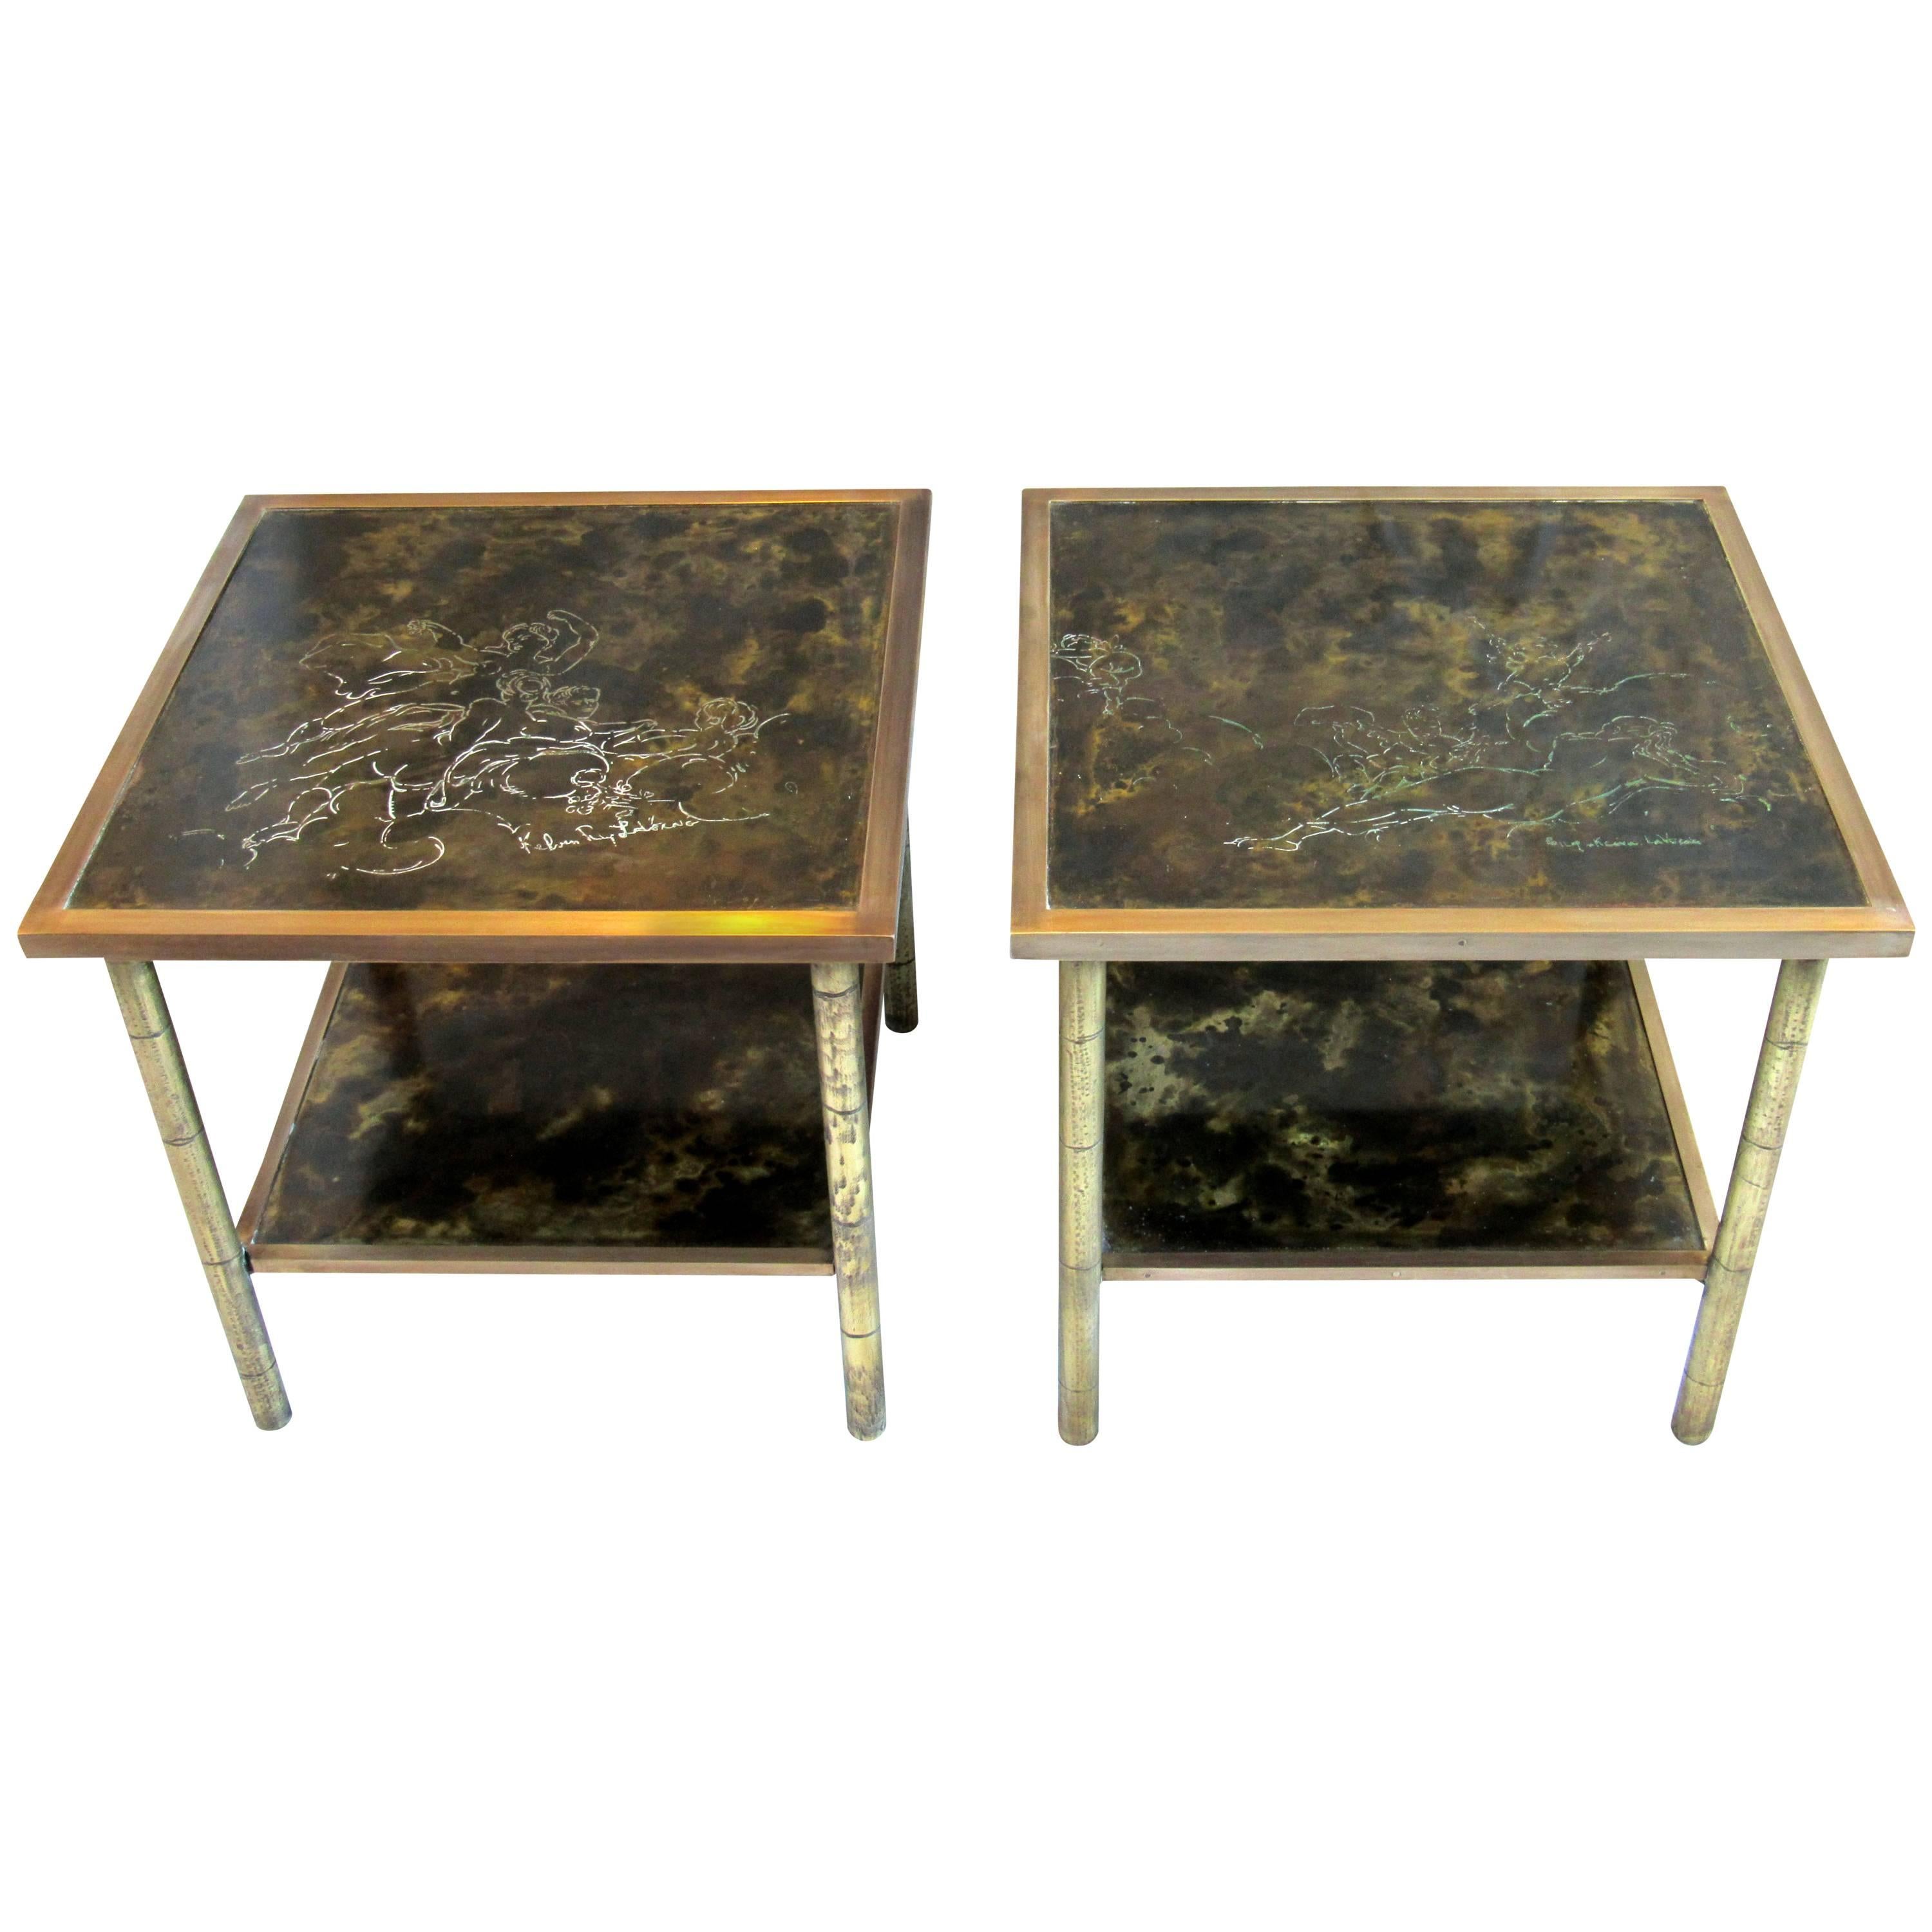 Rare Etched Brass Kelvin & Philip LaVerne Two-Tier End Tables "Muses" circa 1970